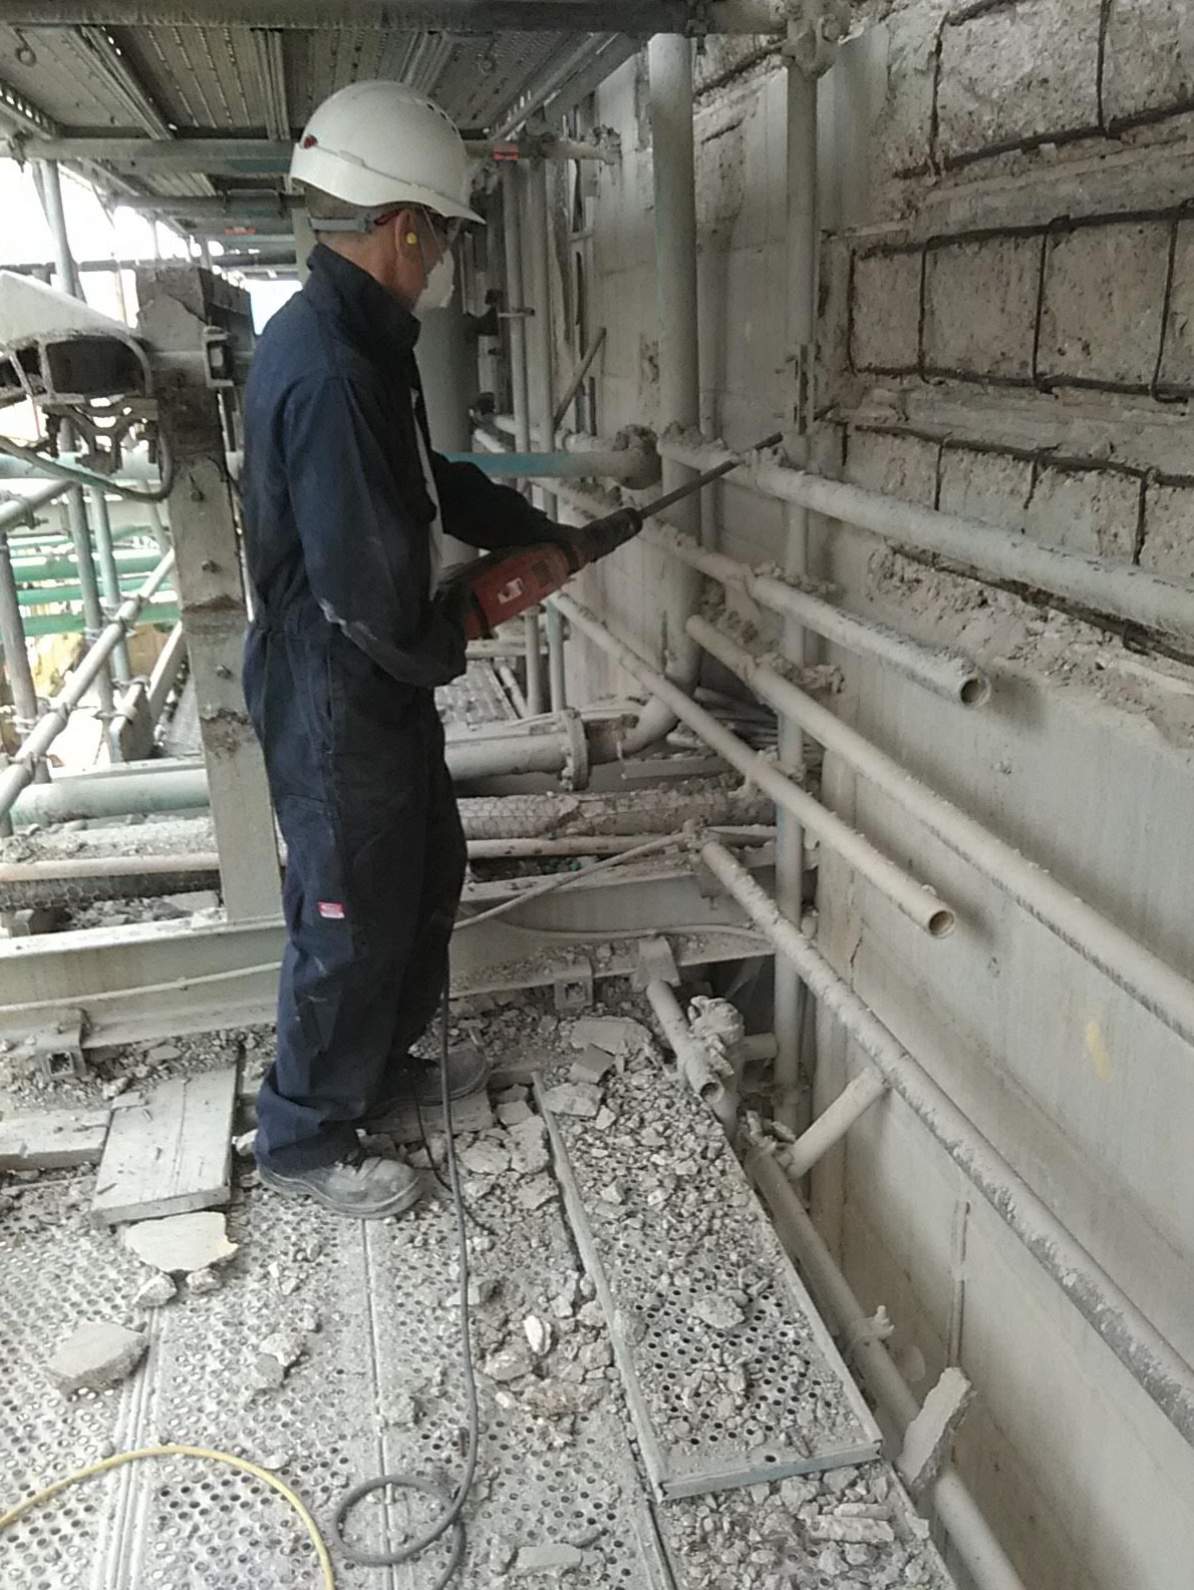 Damaged and defective concrete removed using power tools